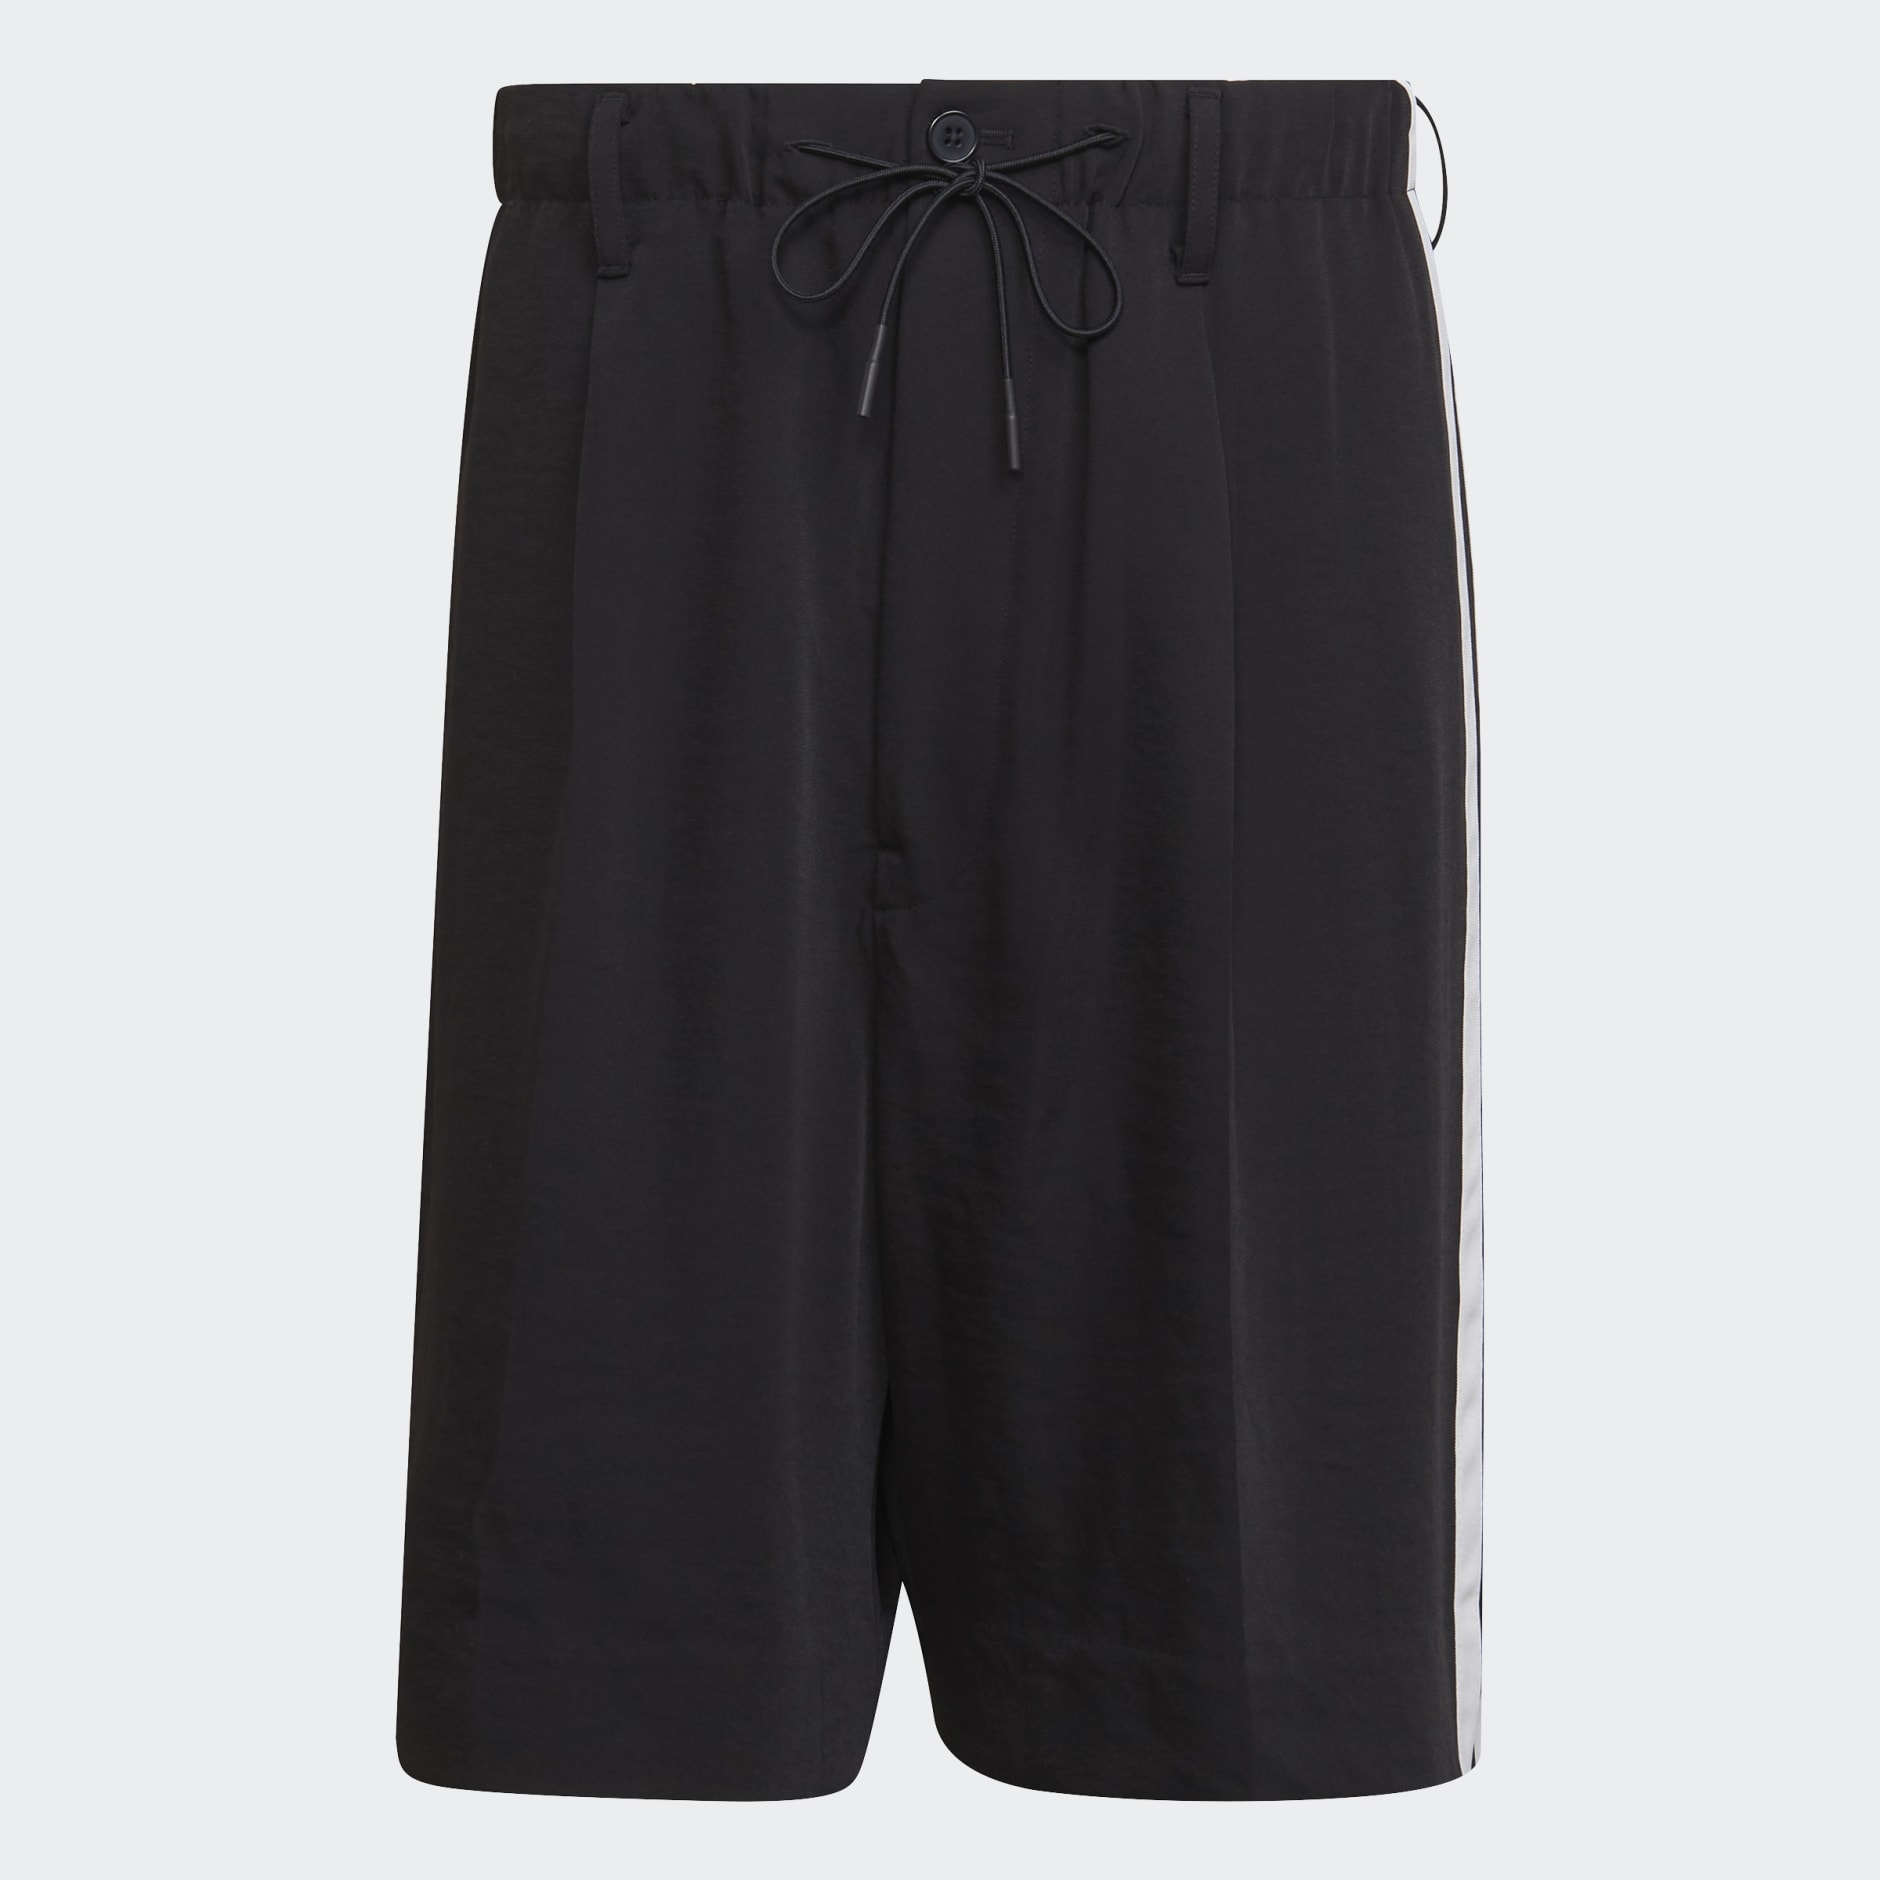 Y-3 Synthetic Ch1 Elegant 3 Stripe Short in Black for Men Mens Clothing Shorts Casual shorts 